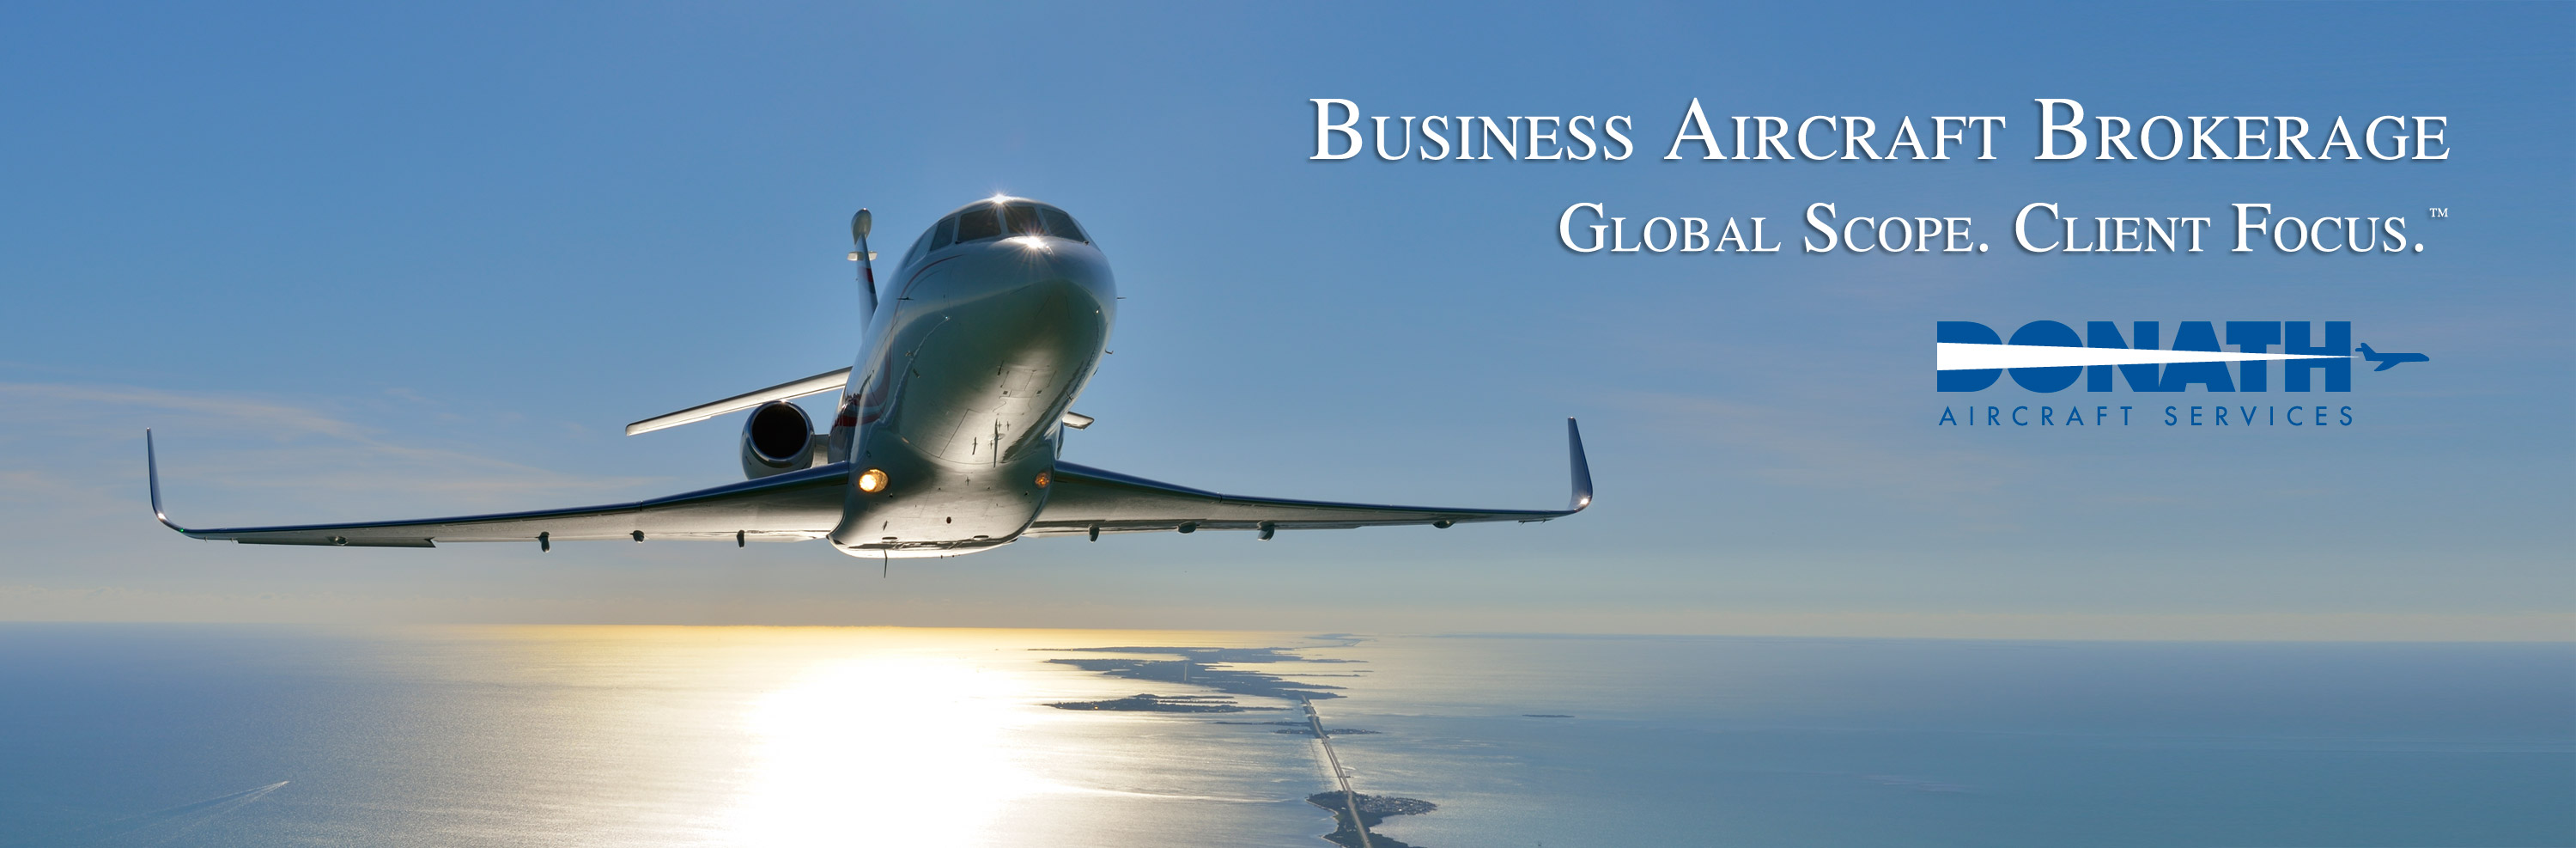 private jet aircraft sales and acquisitions donath aircraft